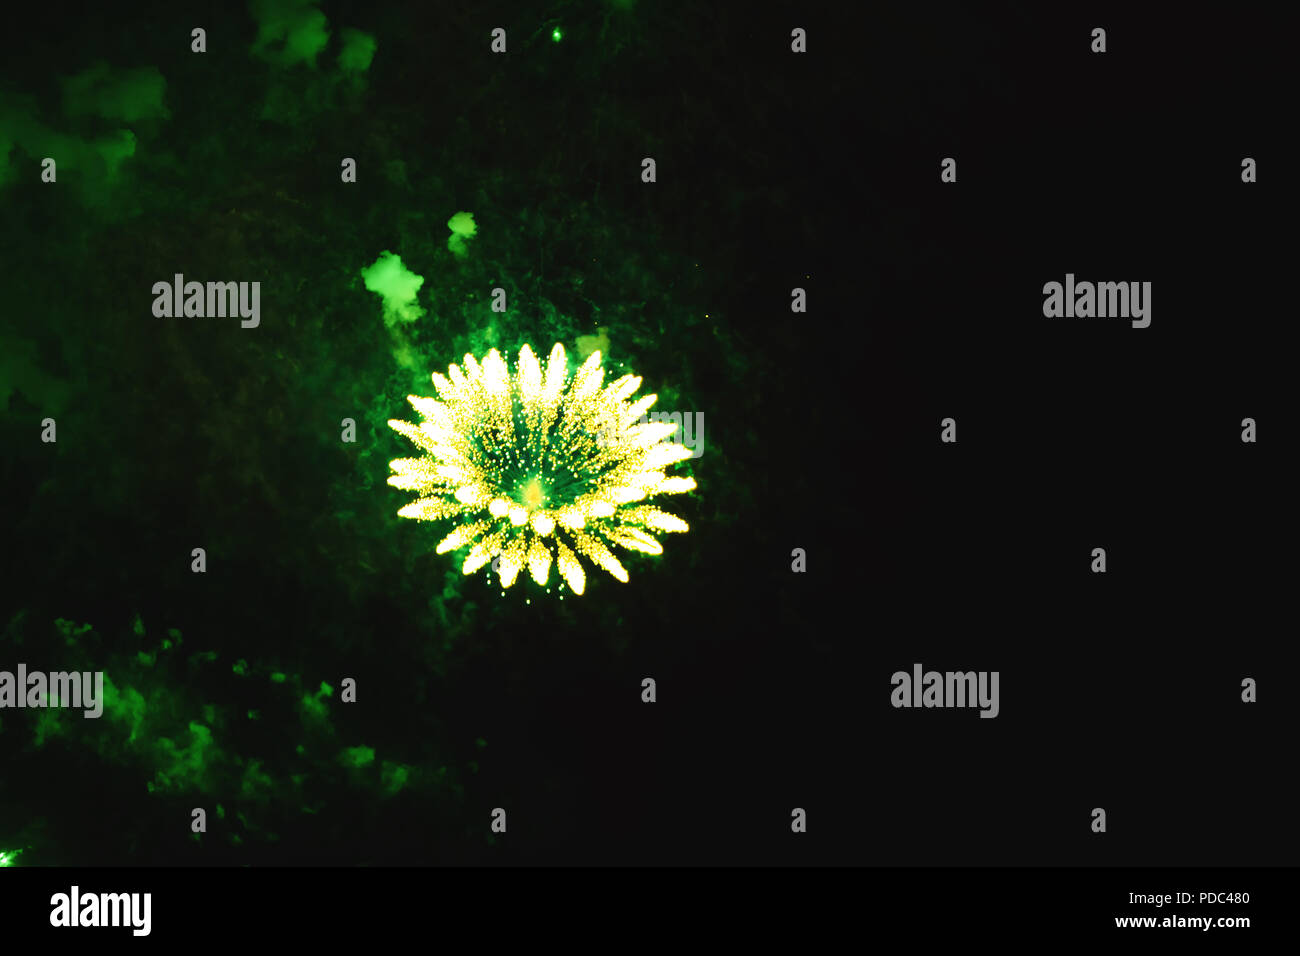 Best creative background with fireworks green flowers projected on the night sky. Colourful festival fireworks isolated in dark background. Christmas  Stock Photo